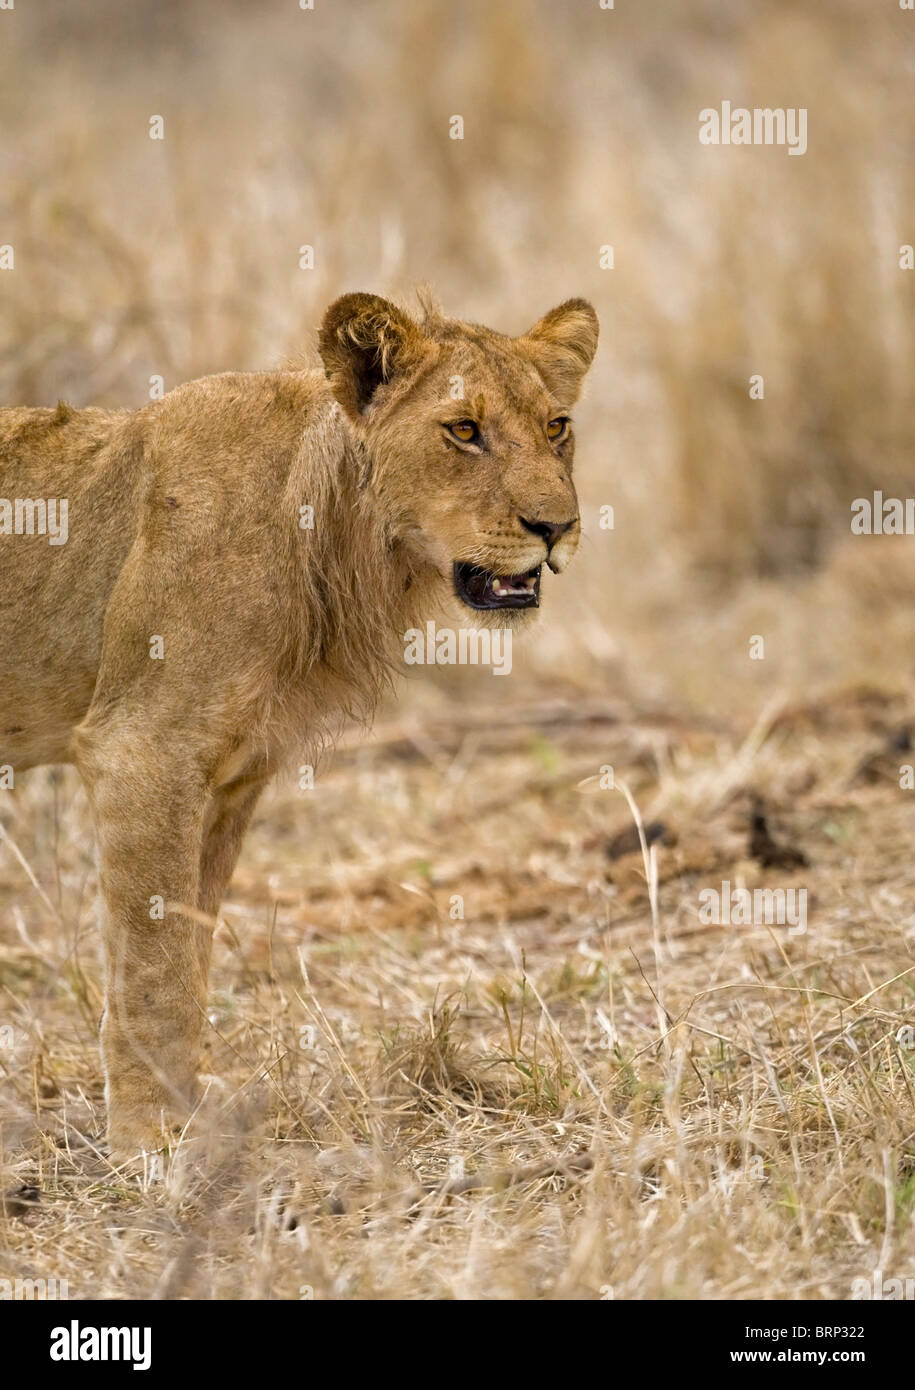 Sub-adult Lion with scraggly mane Stock Photo